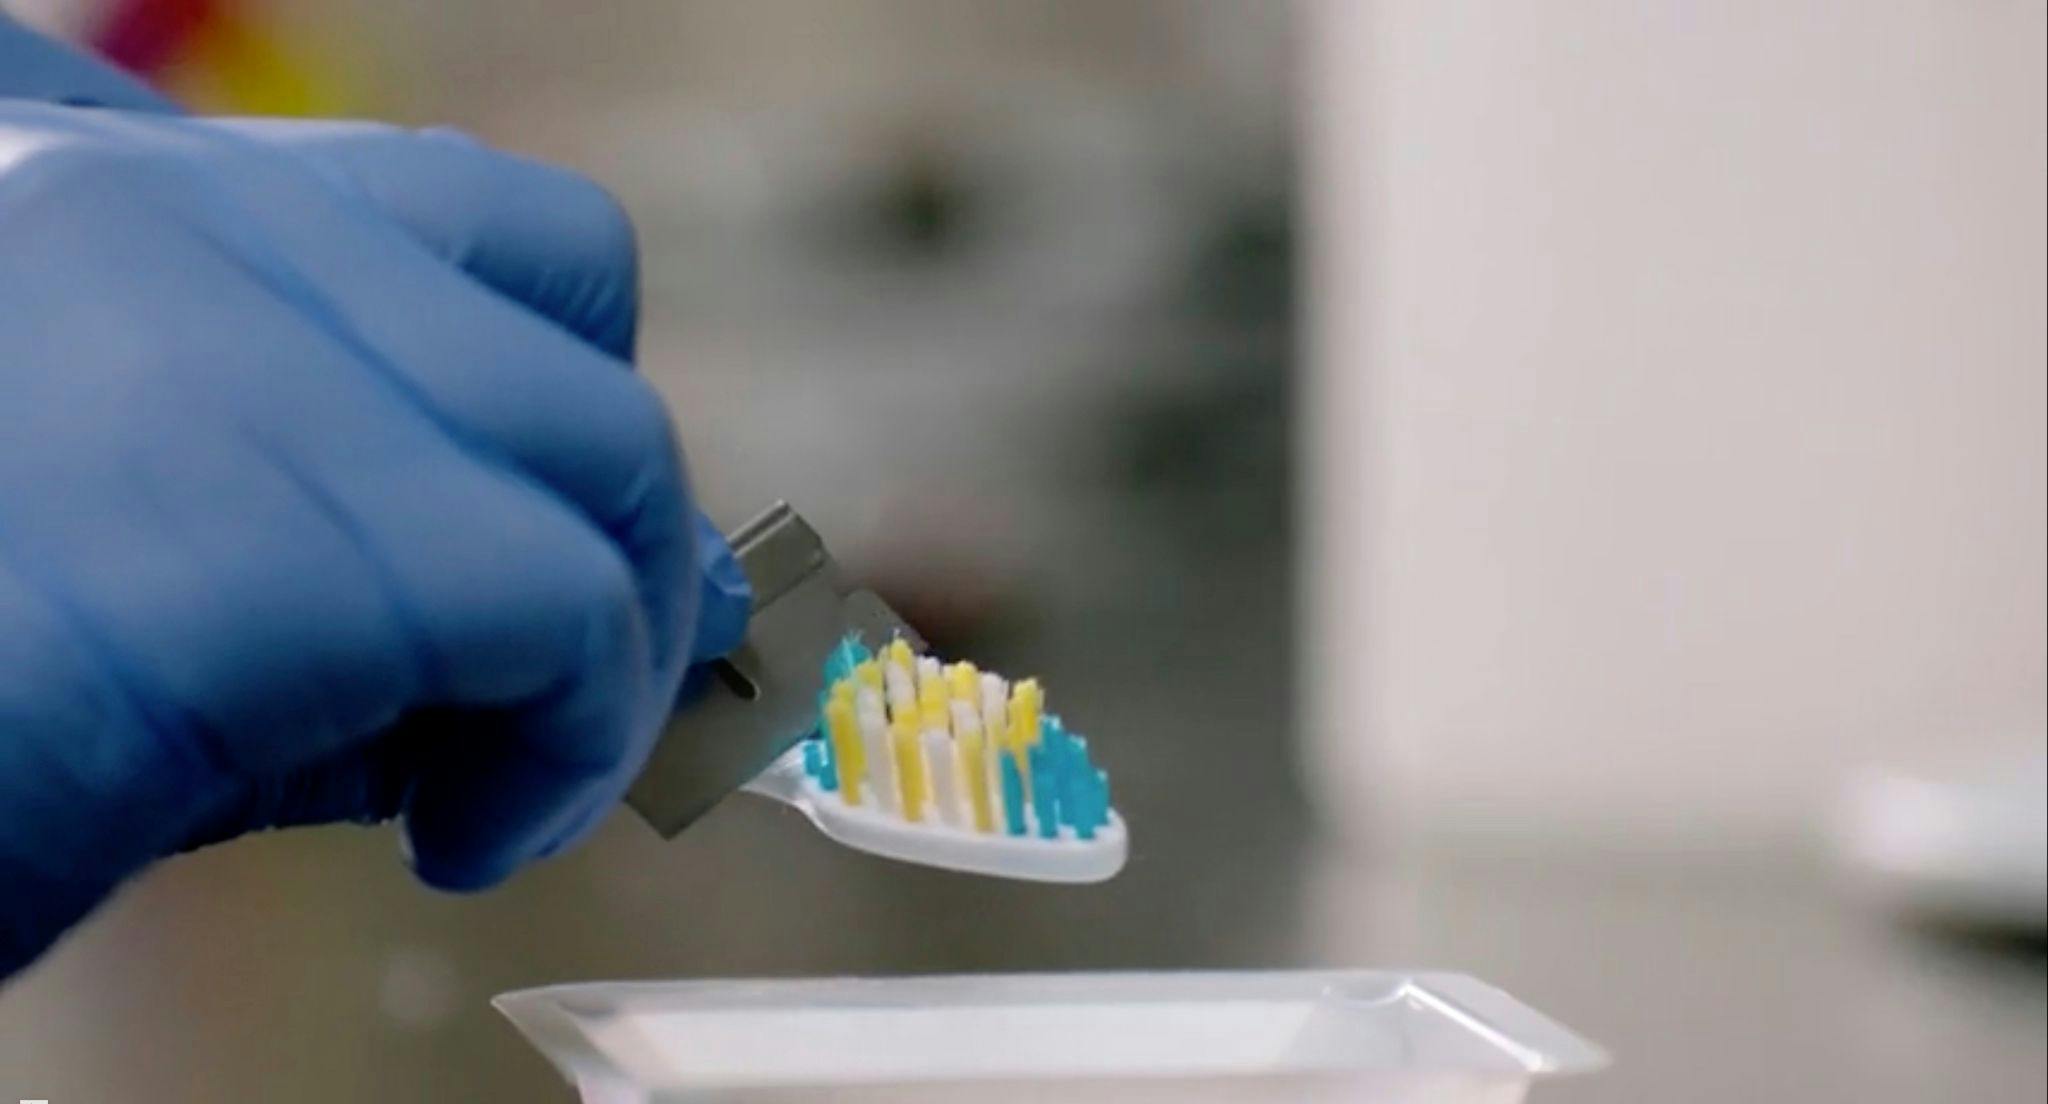 NU study on toothbrushes and microbes.